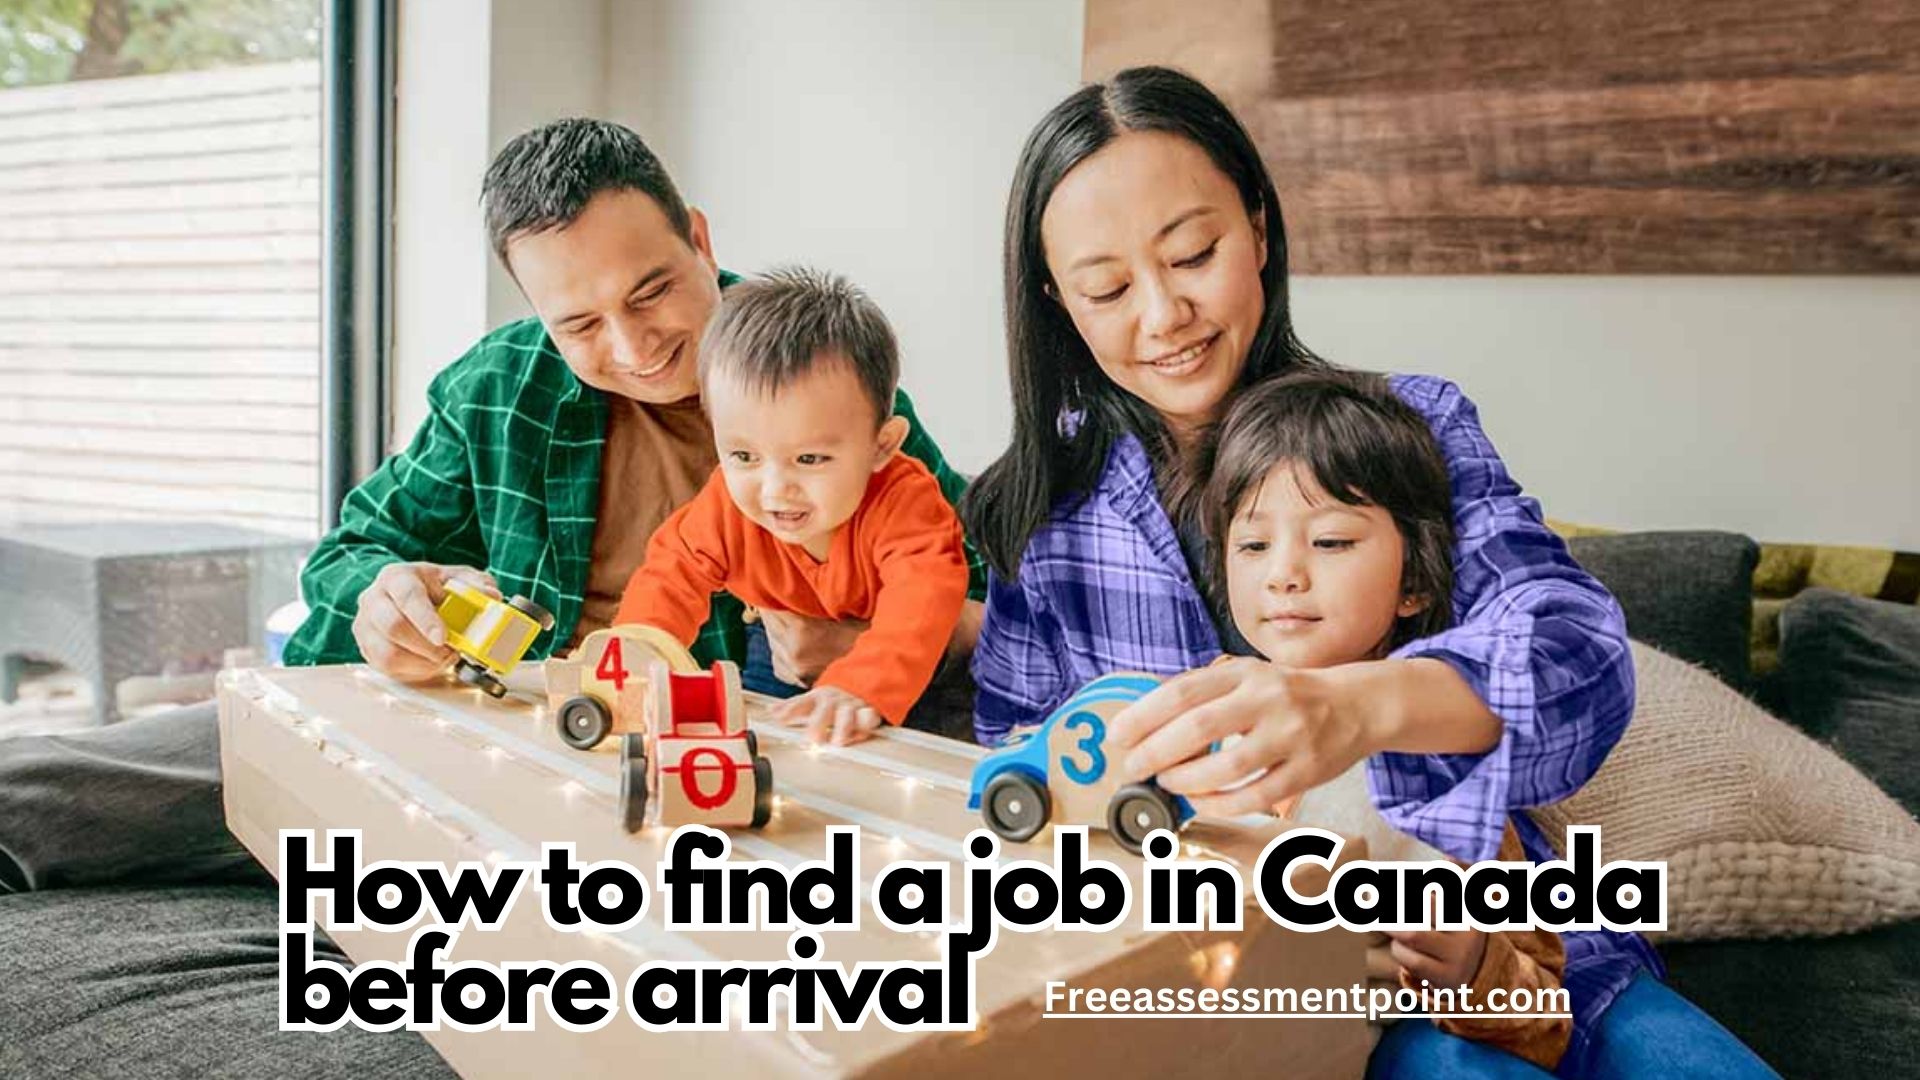 How to find a job in Canada before arrival